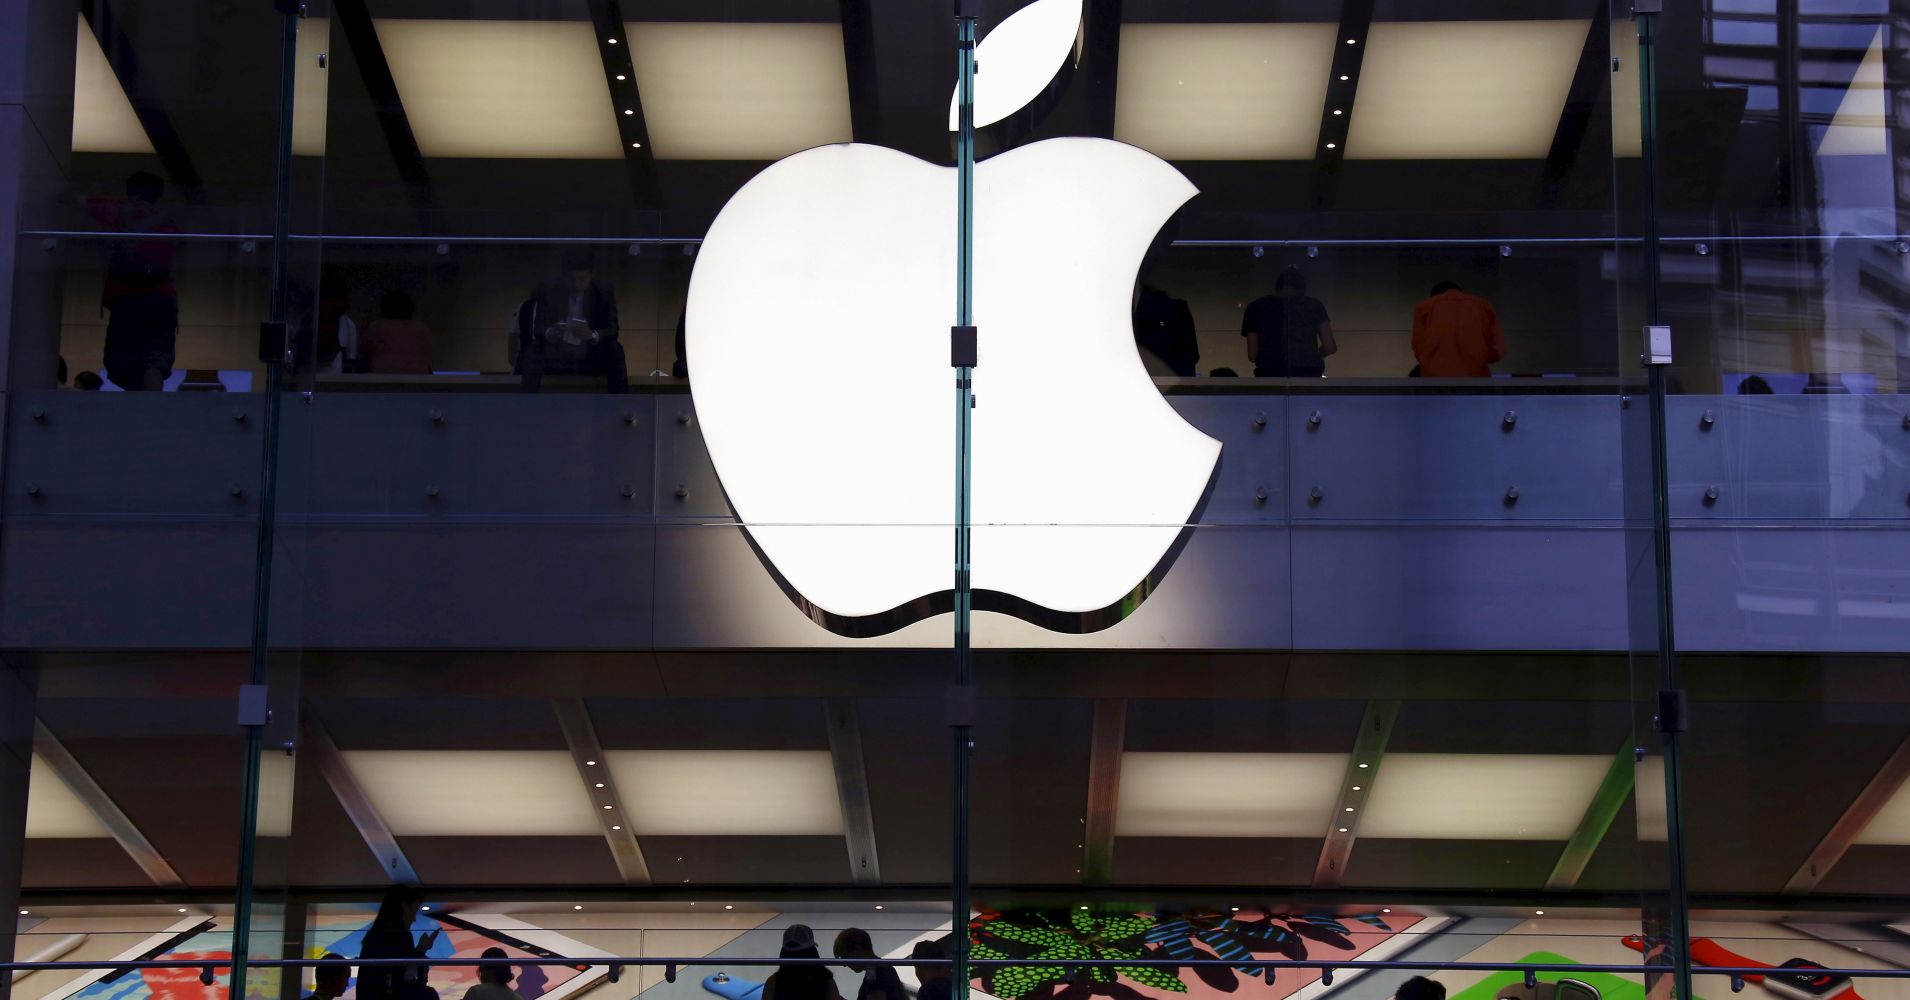 Apple tops sales on china s black friday 523754 2